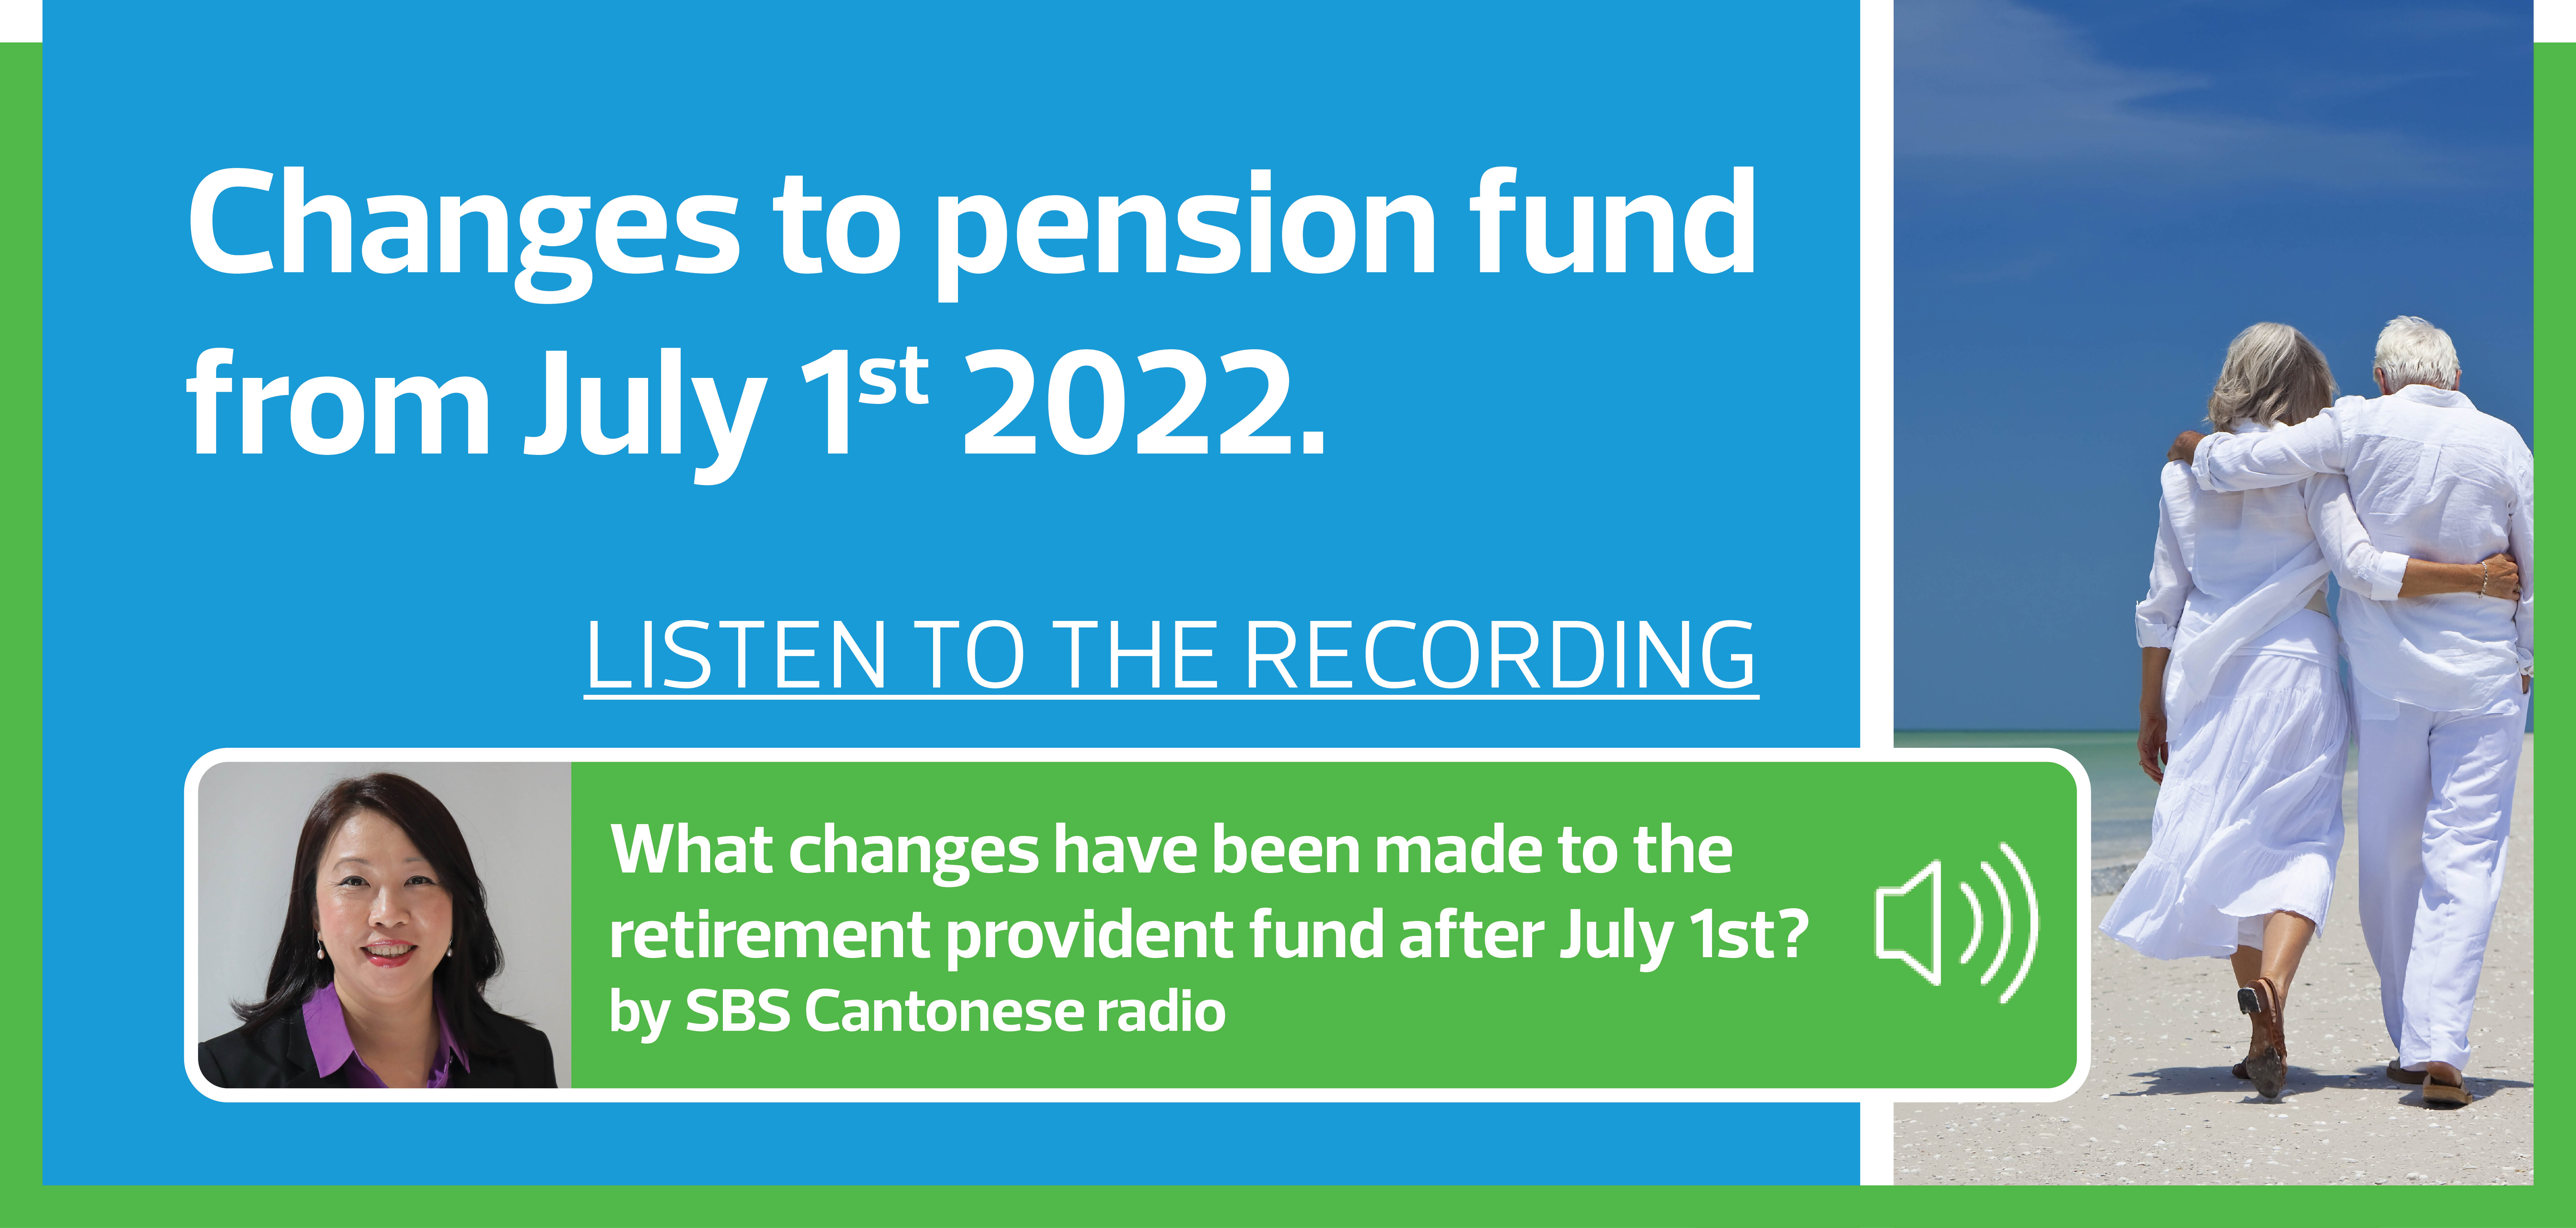 What changes have been made to the retirement provident fund after July 1st? by SBS Cantonese radio